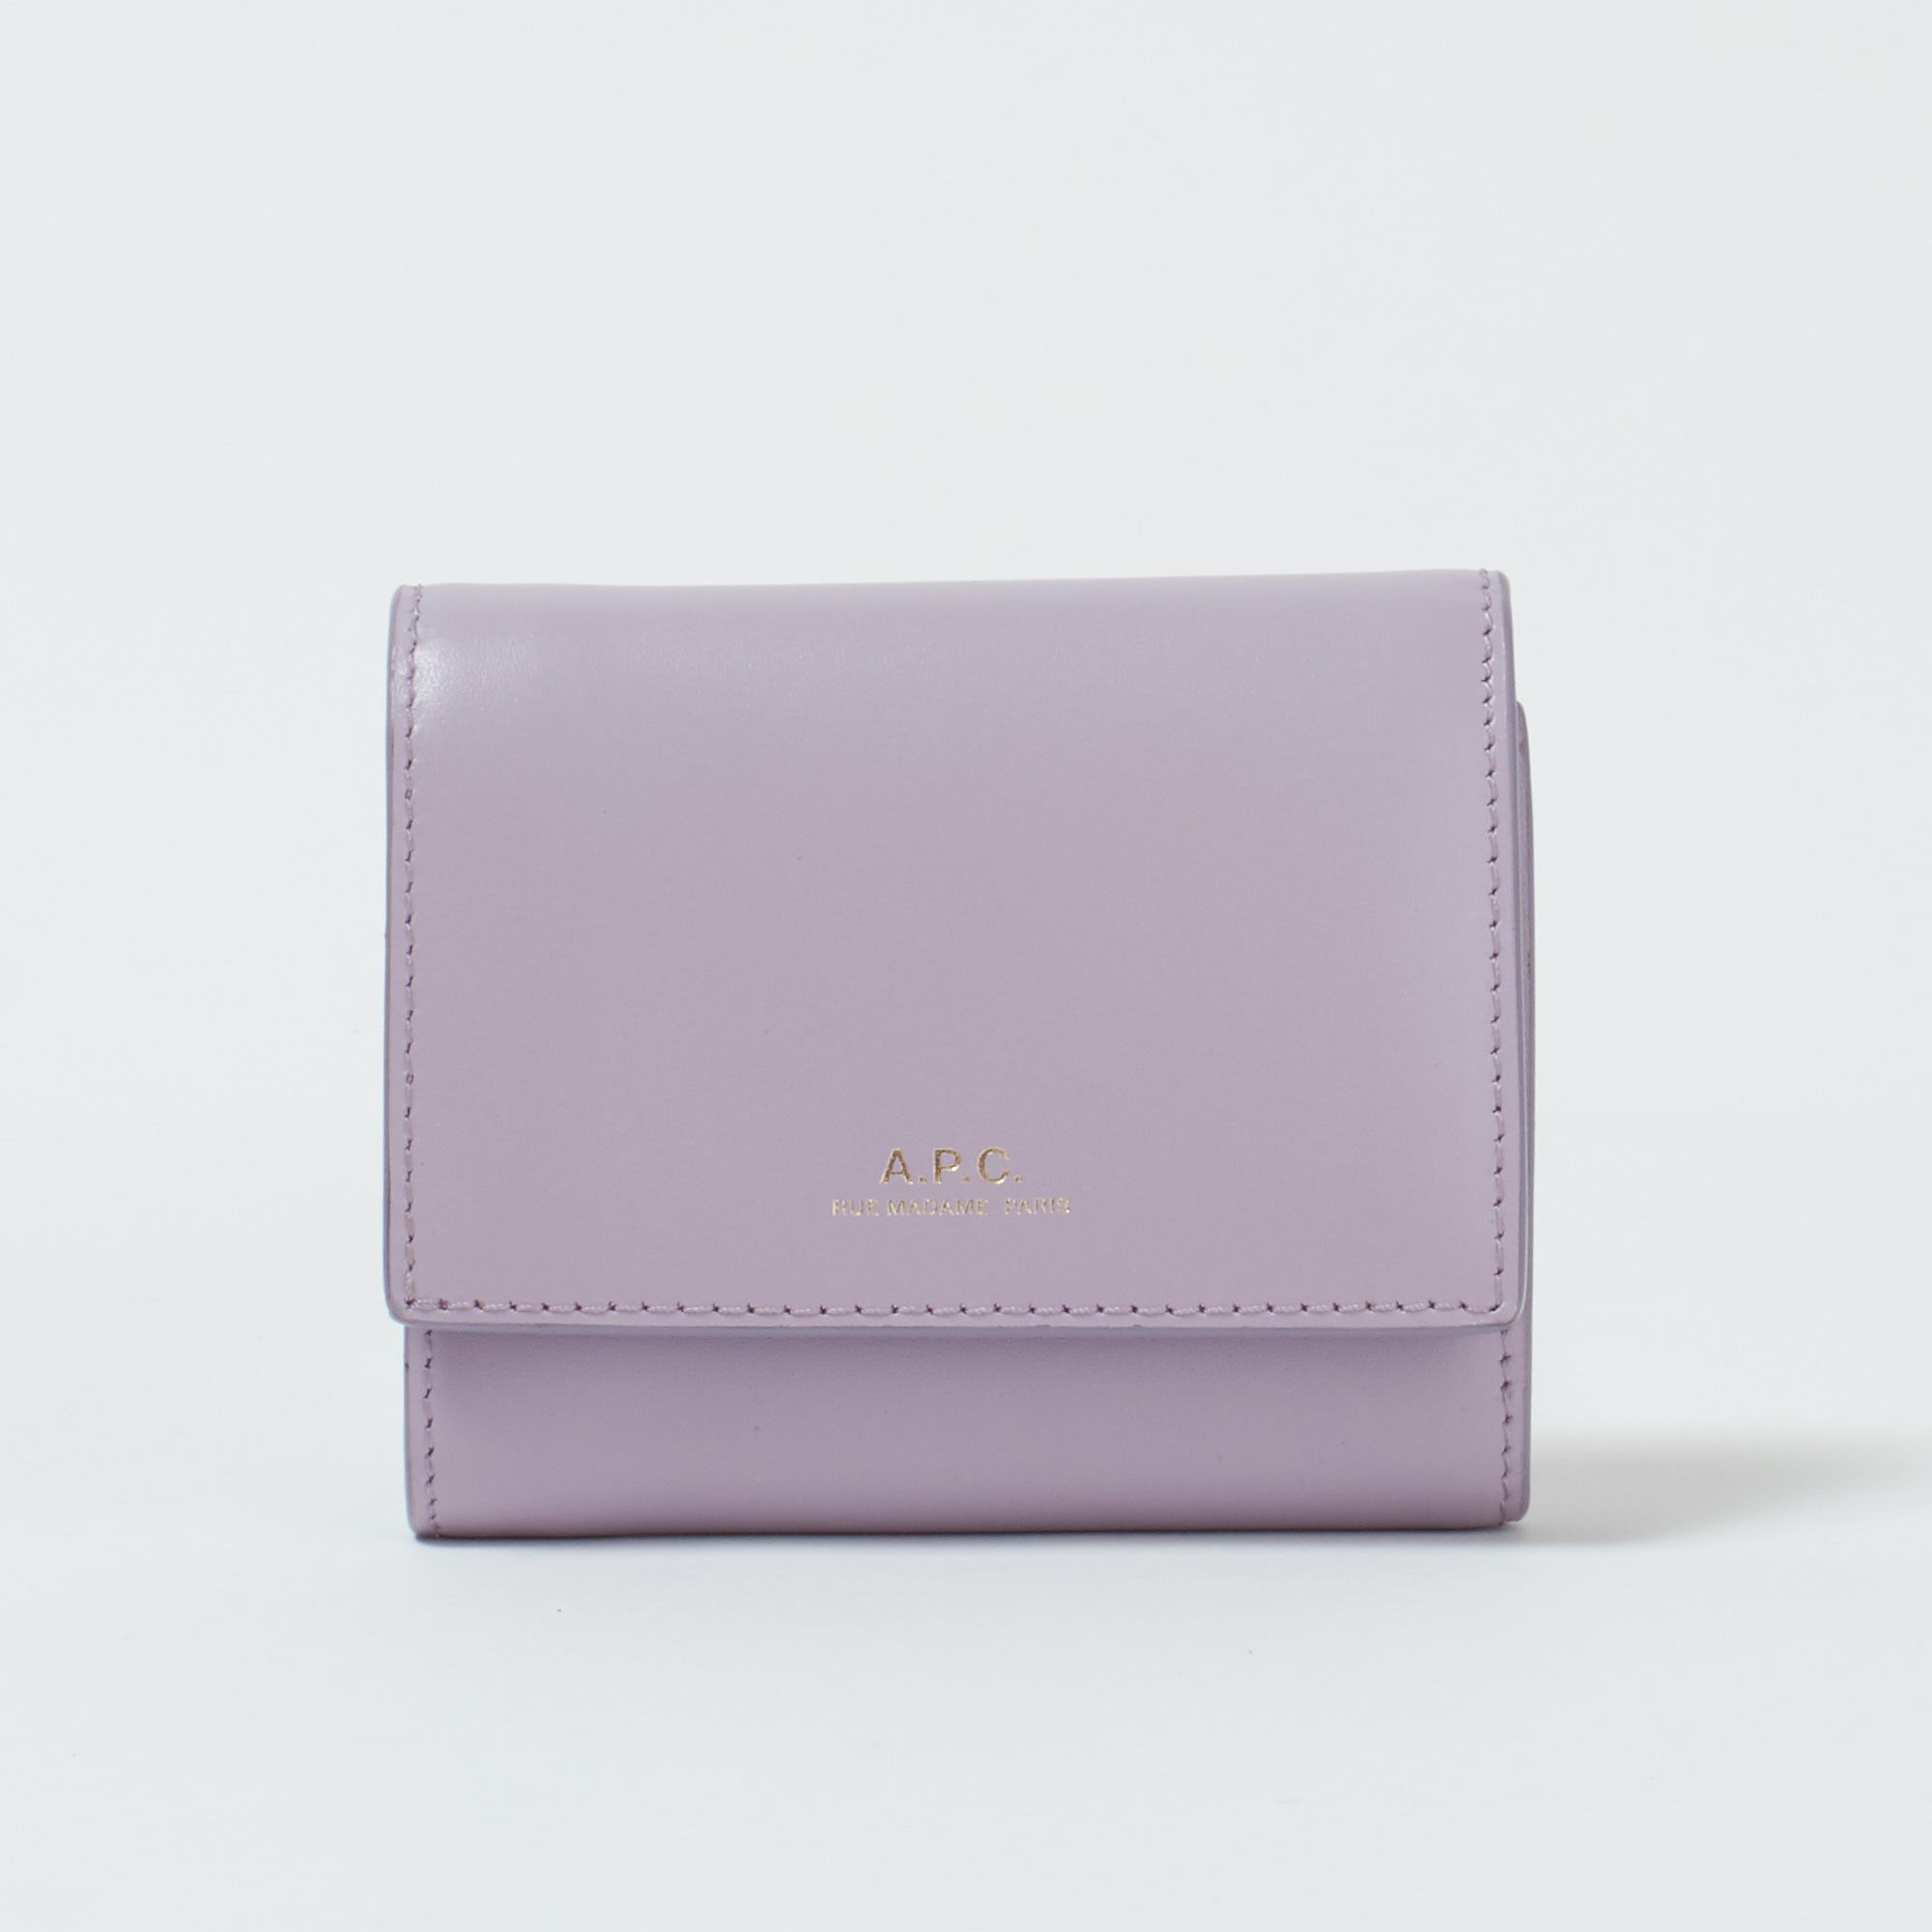  A.P.C.(アー・ペー・セー)/COMPACT LOIS SMALL